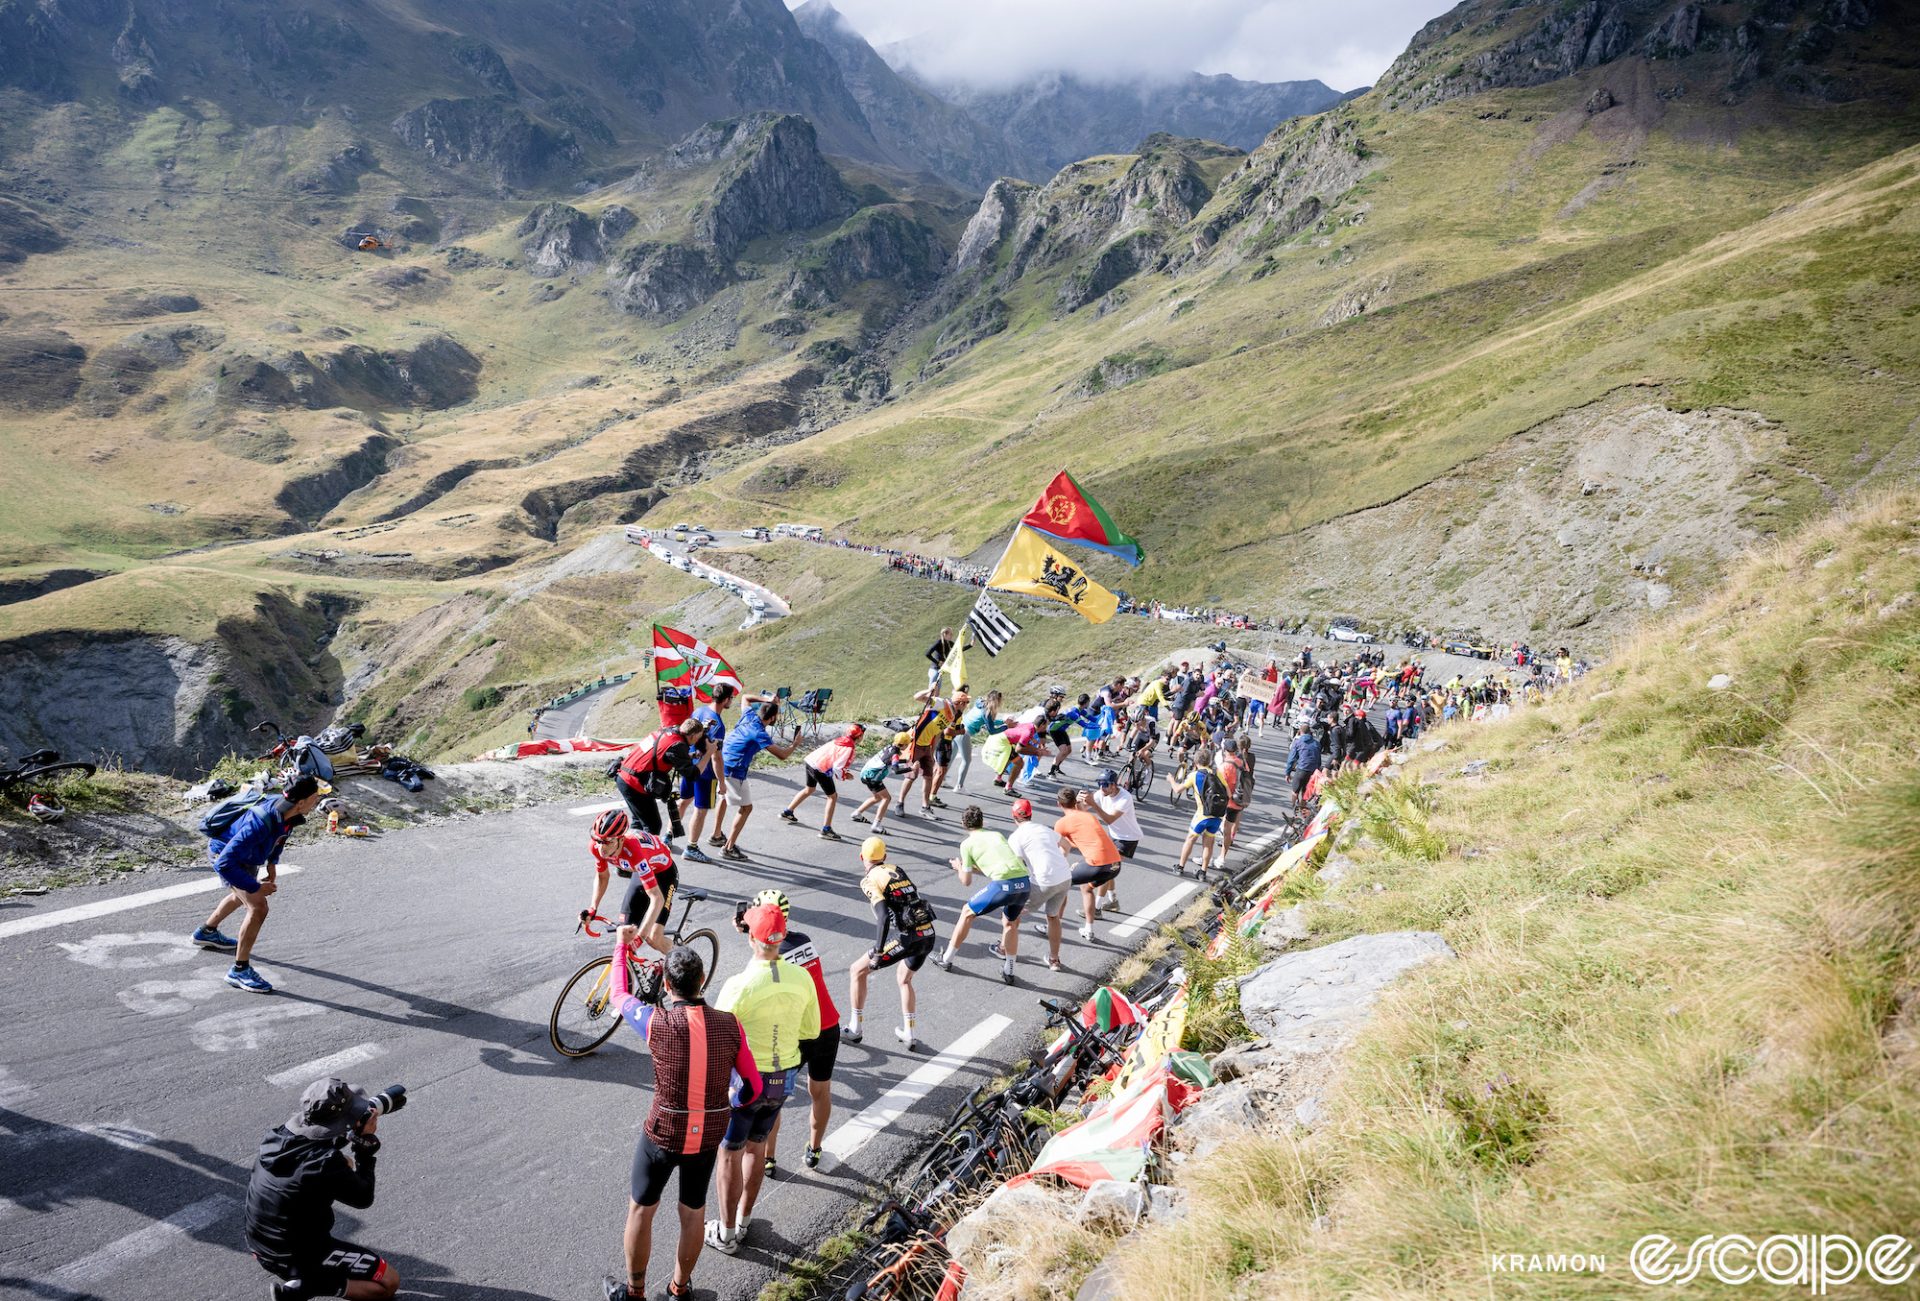 Sepp Kuss climbs the Col du Tourmalet at the 2023 Vuelta a España. He's alone, riding away from his pursuers in front of a line of fans, with rugged Pyreneean peaks and the road switchbacking down the mountain in the background.